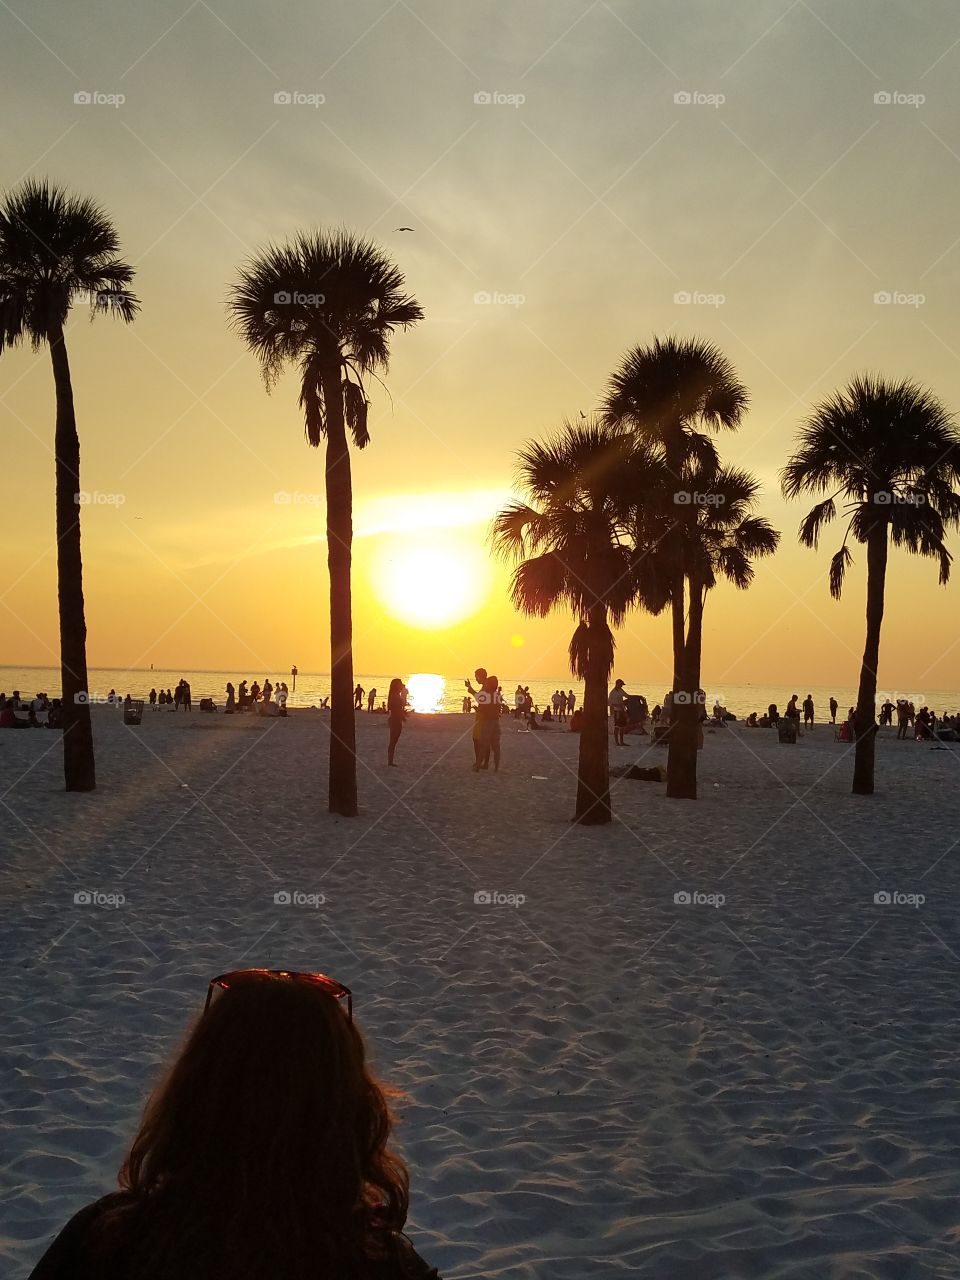 clearwater sunset